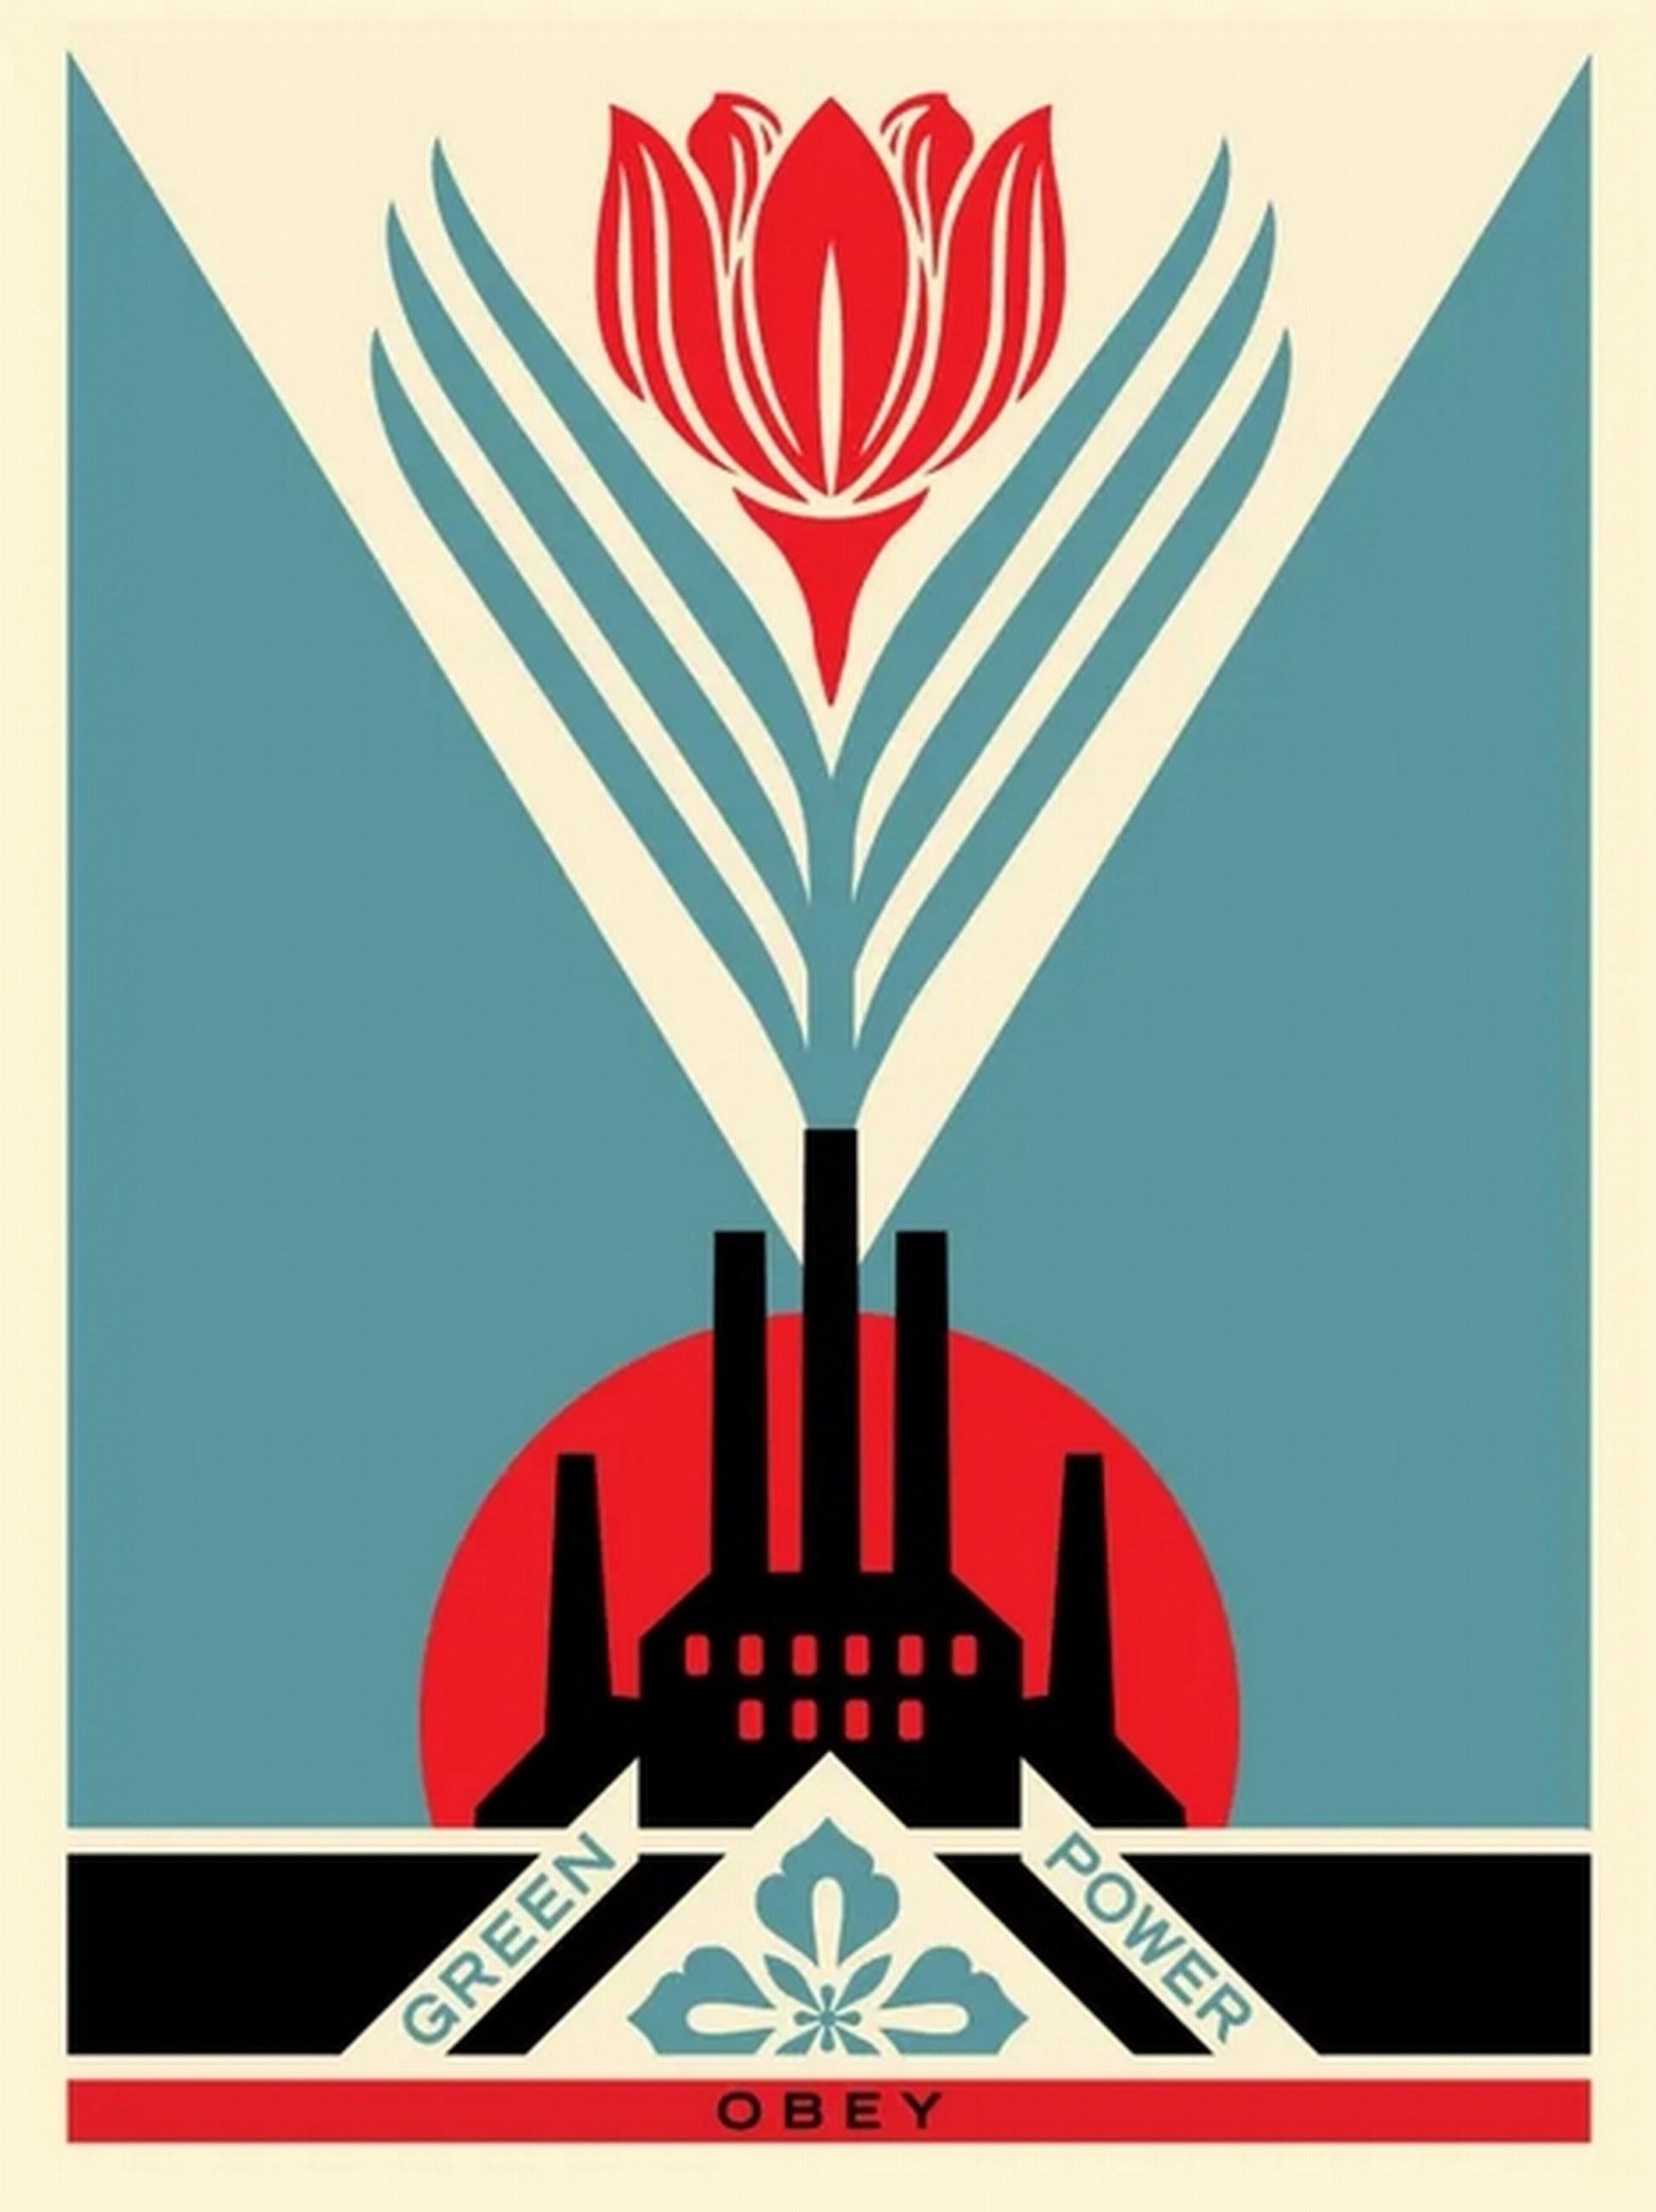 Green Power Factory (Blue) (Iconic, Renewable Energy, Transition, Fossil Fuel) - Print by Shepard Fairey